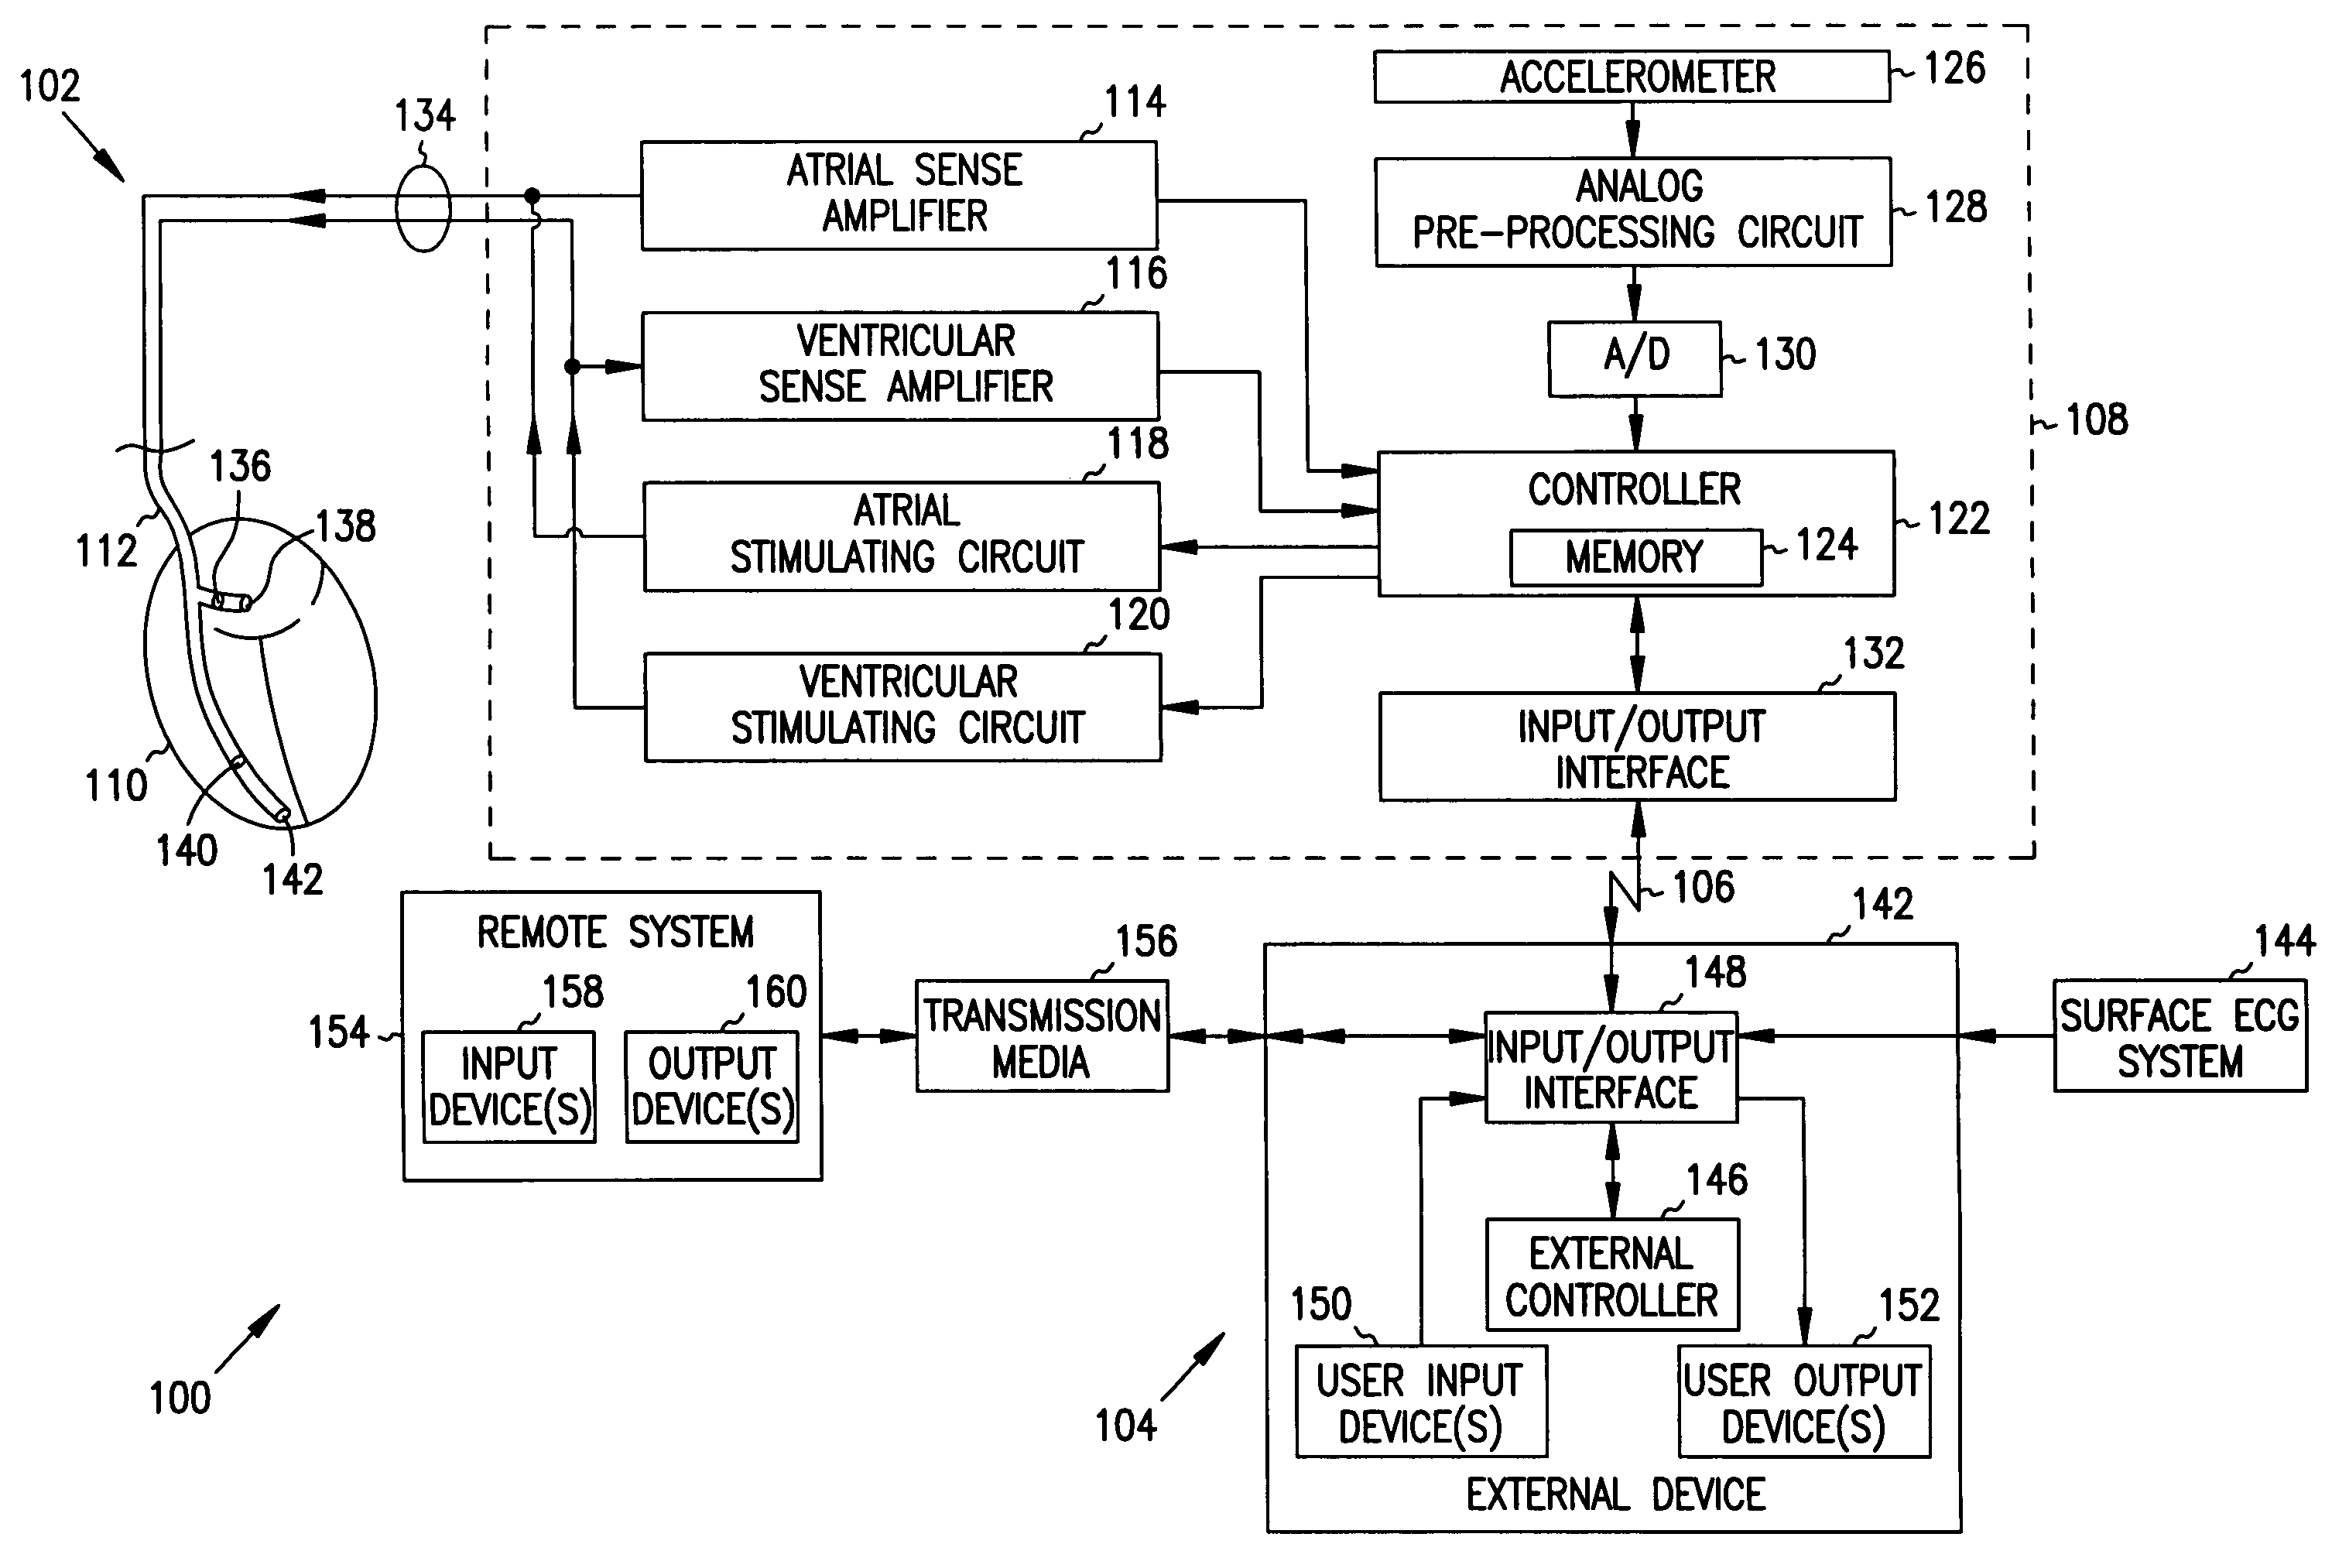 Apparatus and method for outputting heart sounds